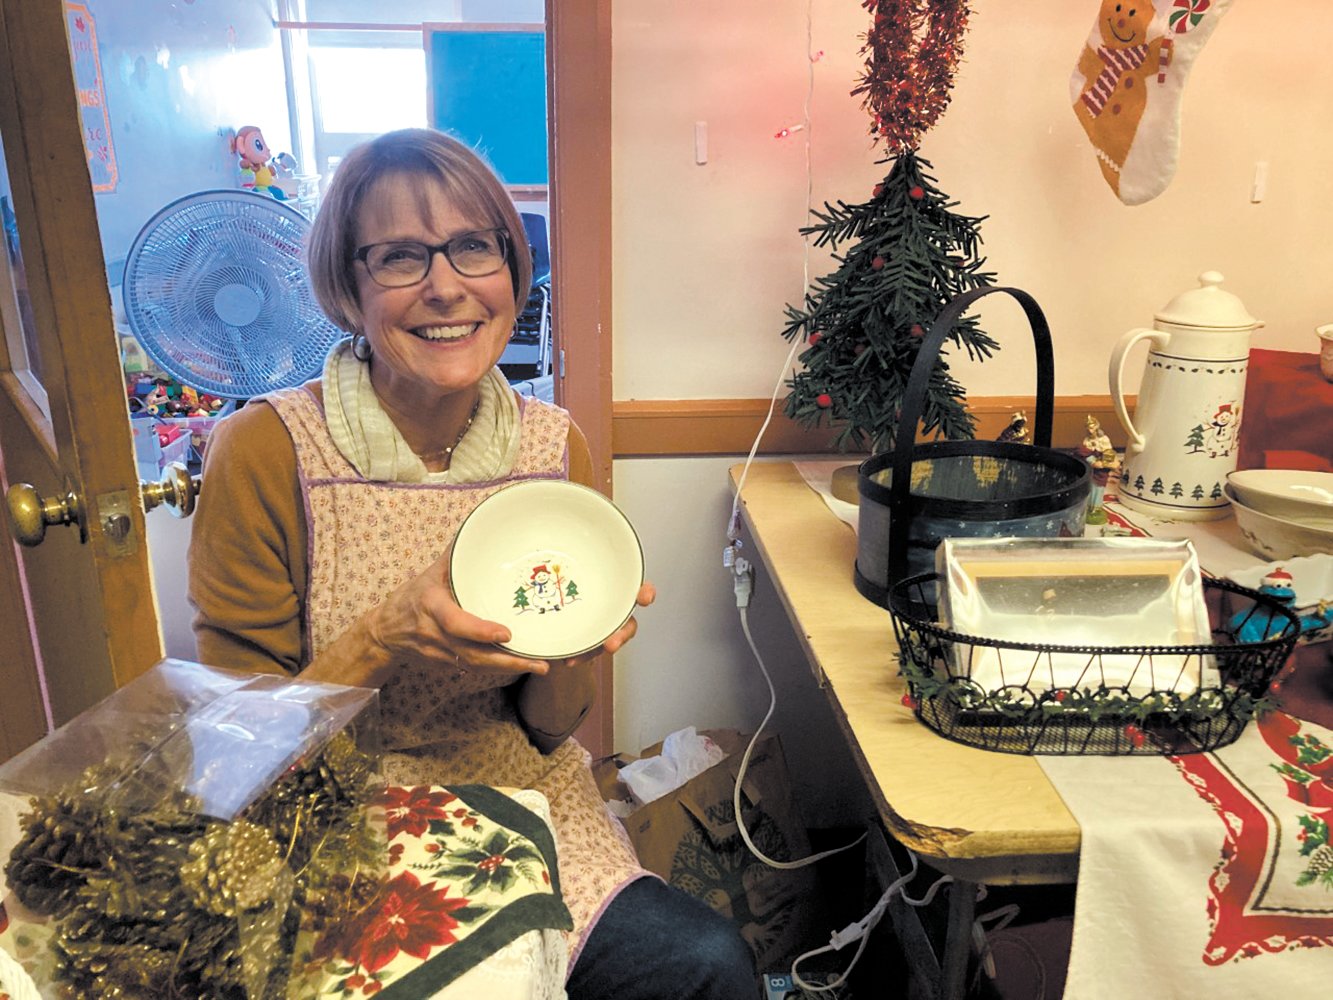 CHRISTMAS TREASURES: Barbara Spencer, the minister’s wife, assisted shoppers in finding just the right item to take home. Among some of the kitchenware were holiday dishes with snowmen.